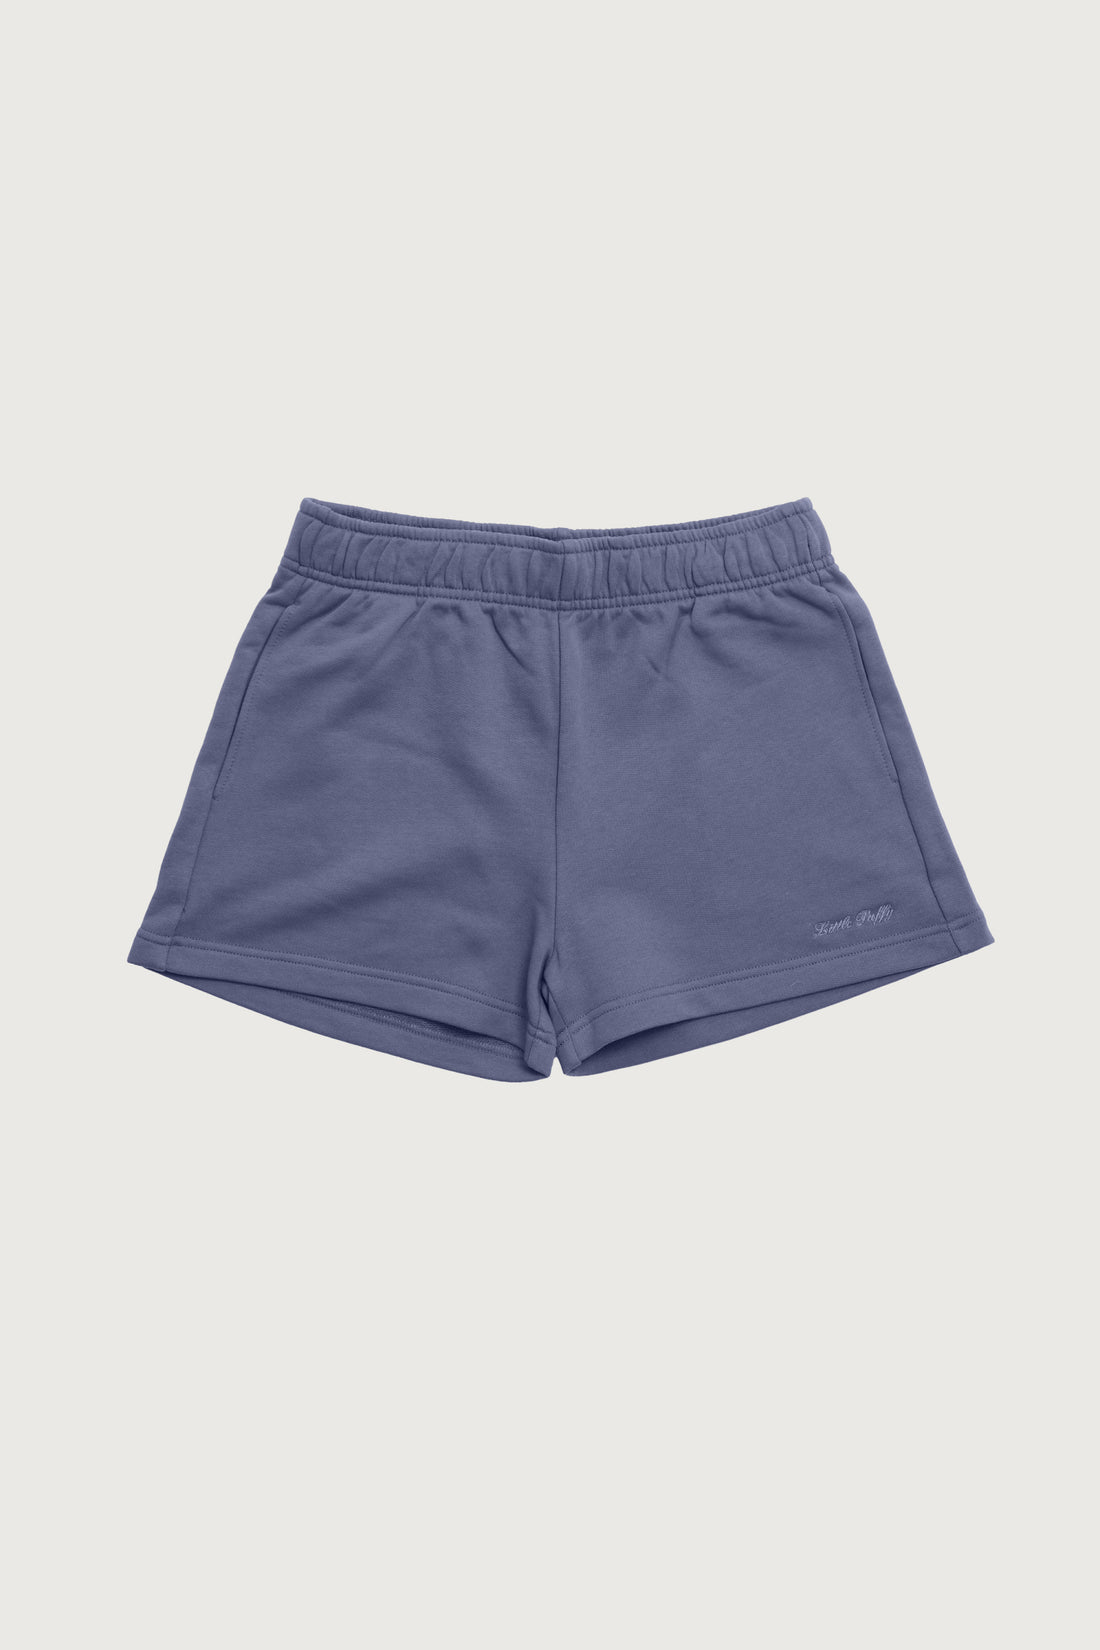 Core Shorts + Space Blue - Little Puffy